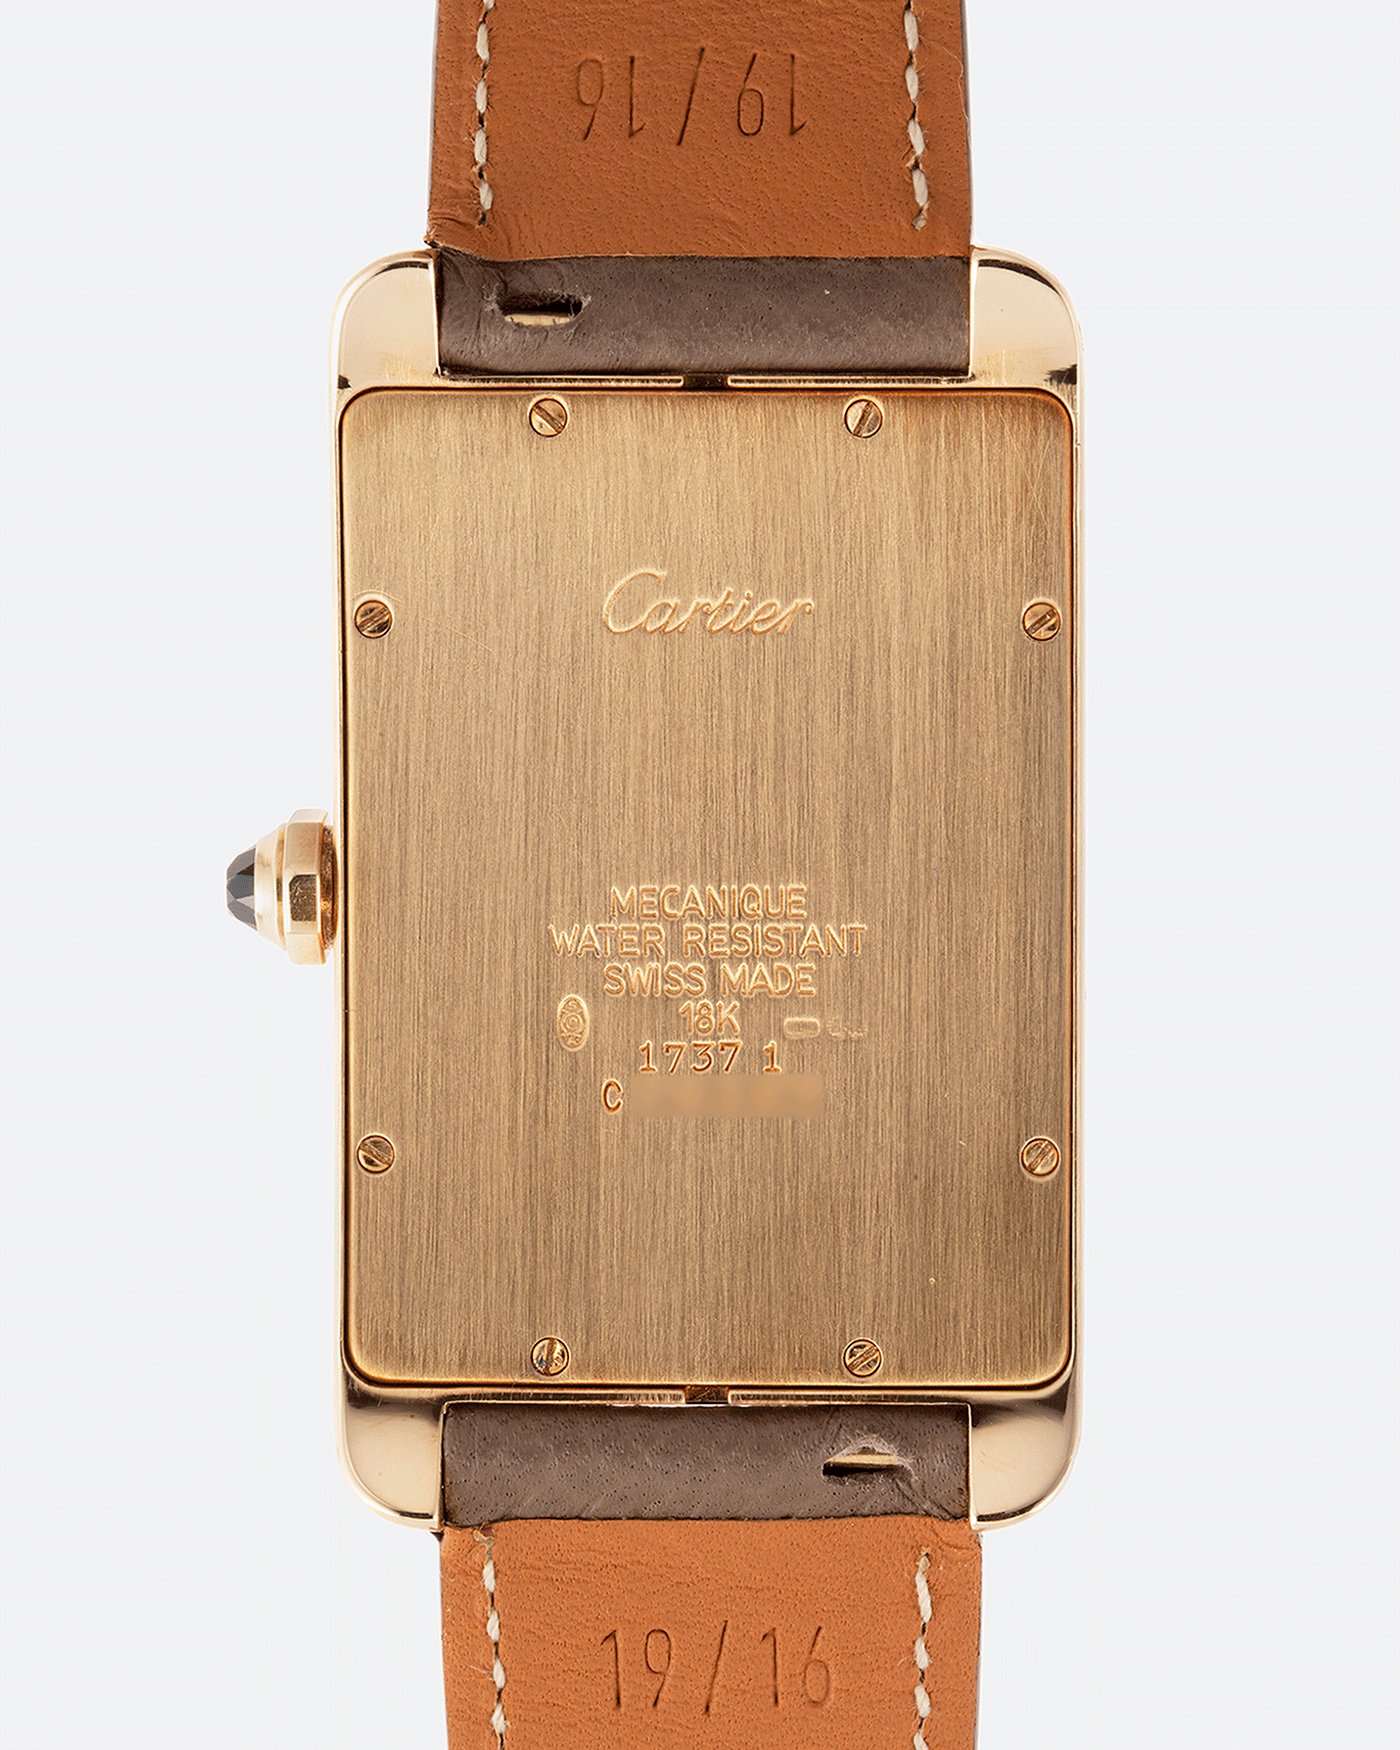 Brand: Cartier Year: 1999 Model: CPCP Collection Prive Tank Americaine Reference: 1737 Material: 18k Yellow Gold Movement: Cartier Caliber 430 MC Case Diameter: 45mmX26mm Strap: Nostime Taupe Grained Calf